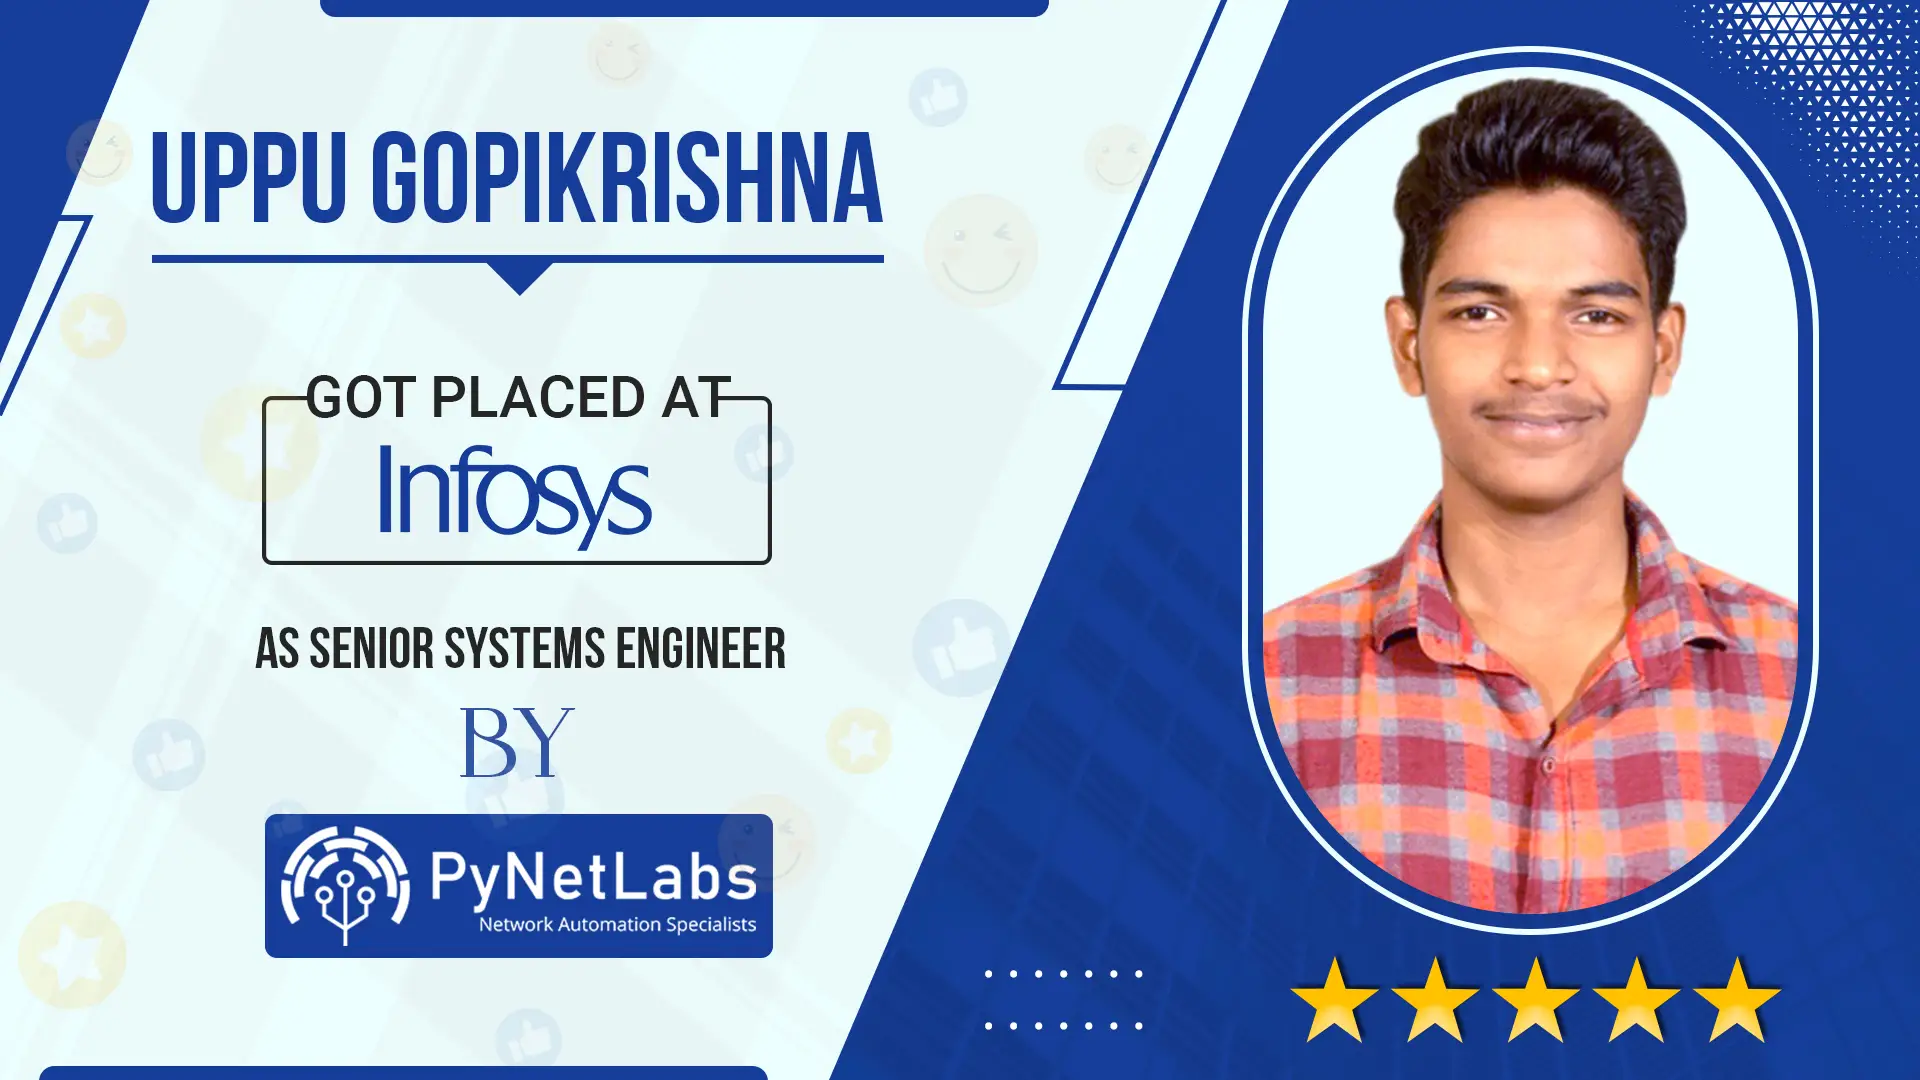 Uppu Gopikrishna Got placed at Infosys as Senior Systems Engineer by PyNet Labs